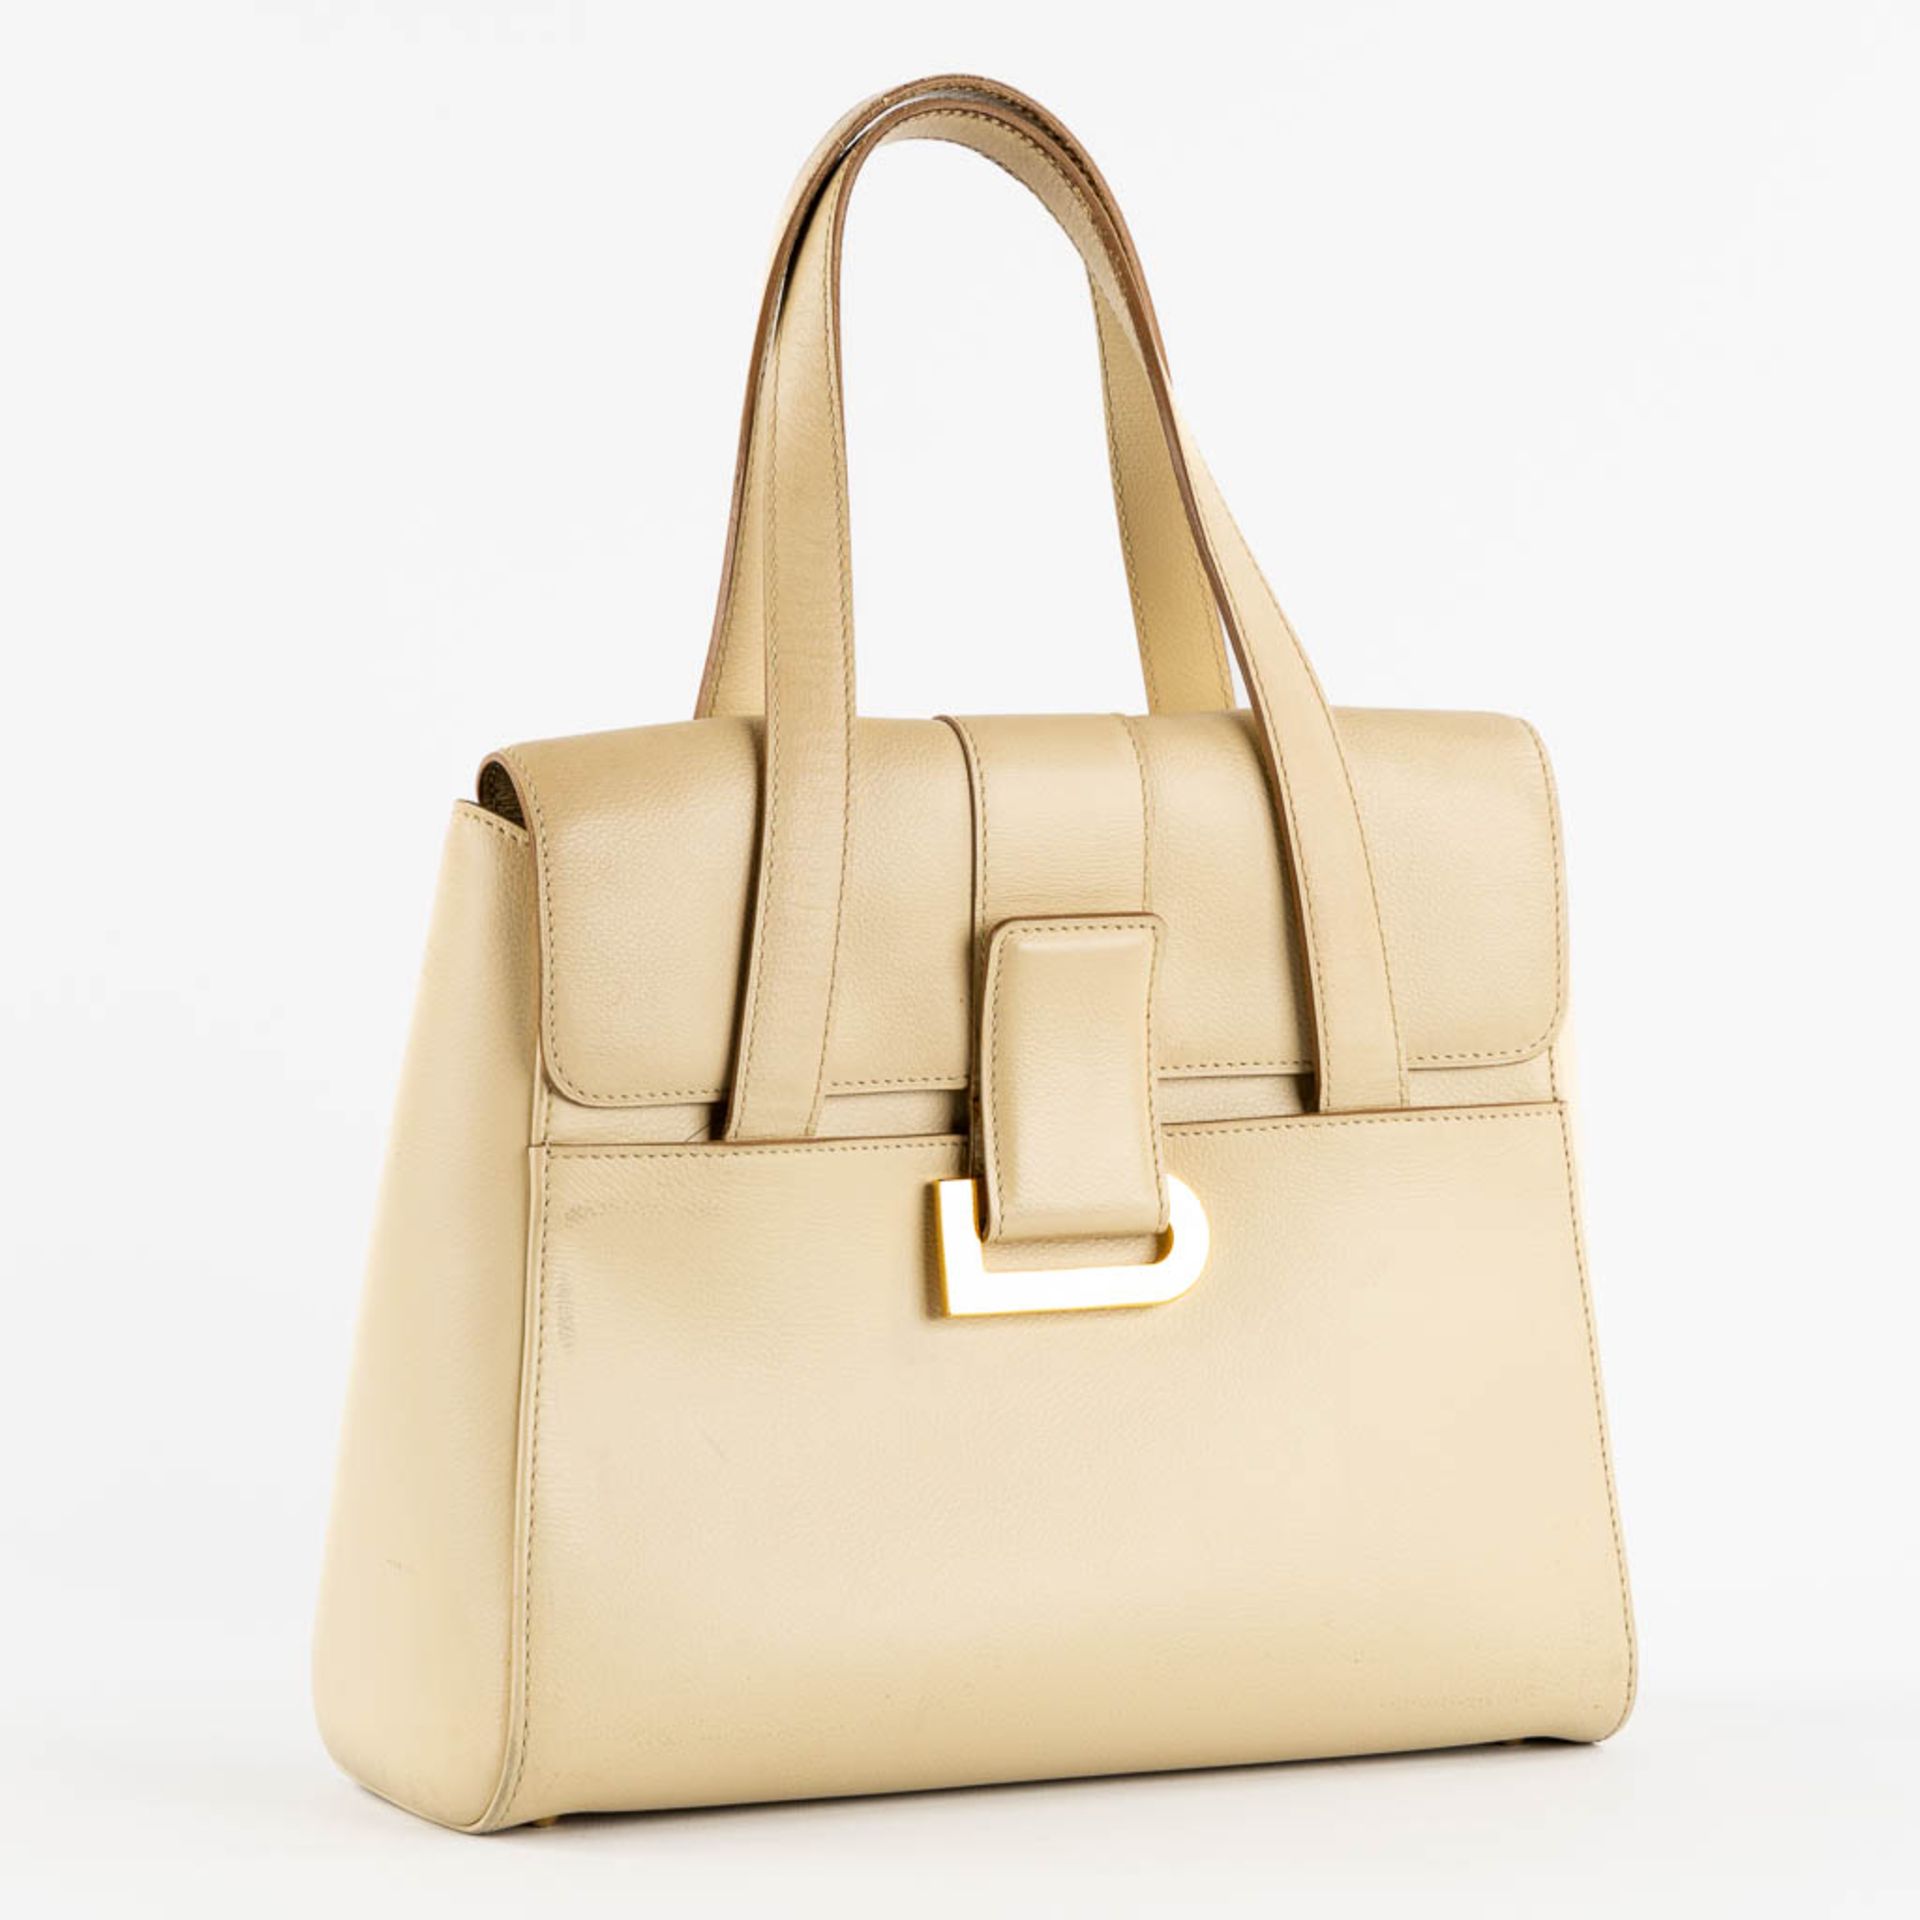 Delvaux model 'Reverie' Jumping, Ivoire. Ivory coloured leather. (L:11 x W:28 x H:23 cm)